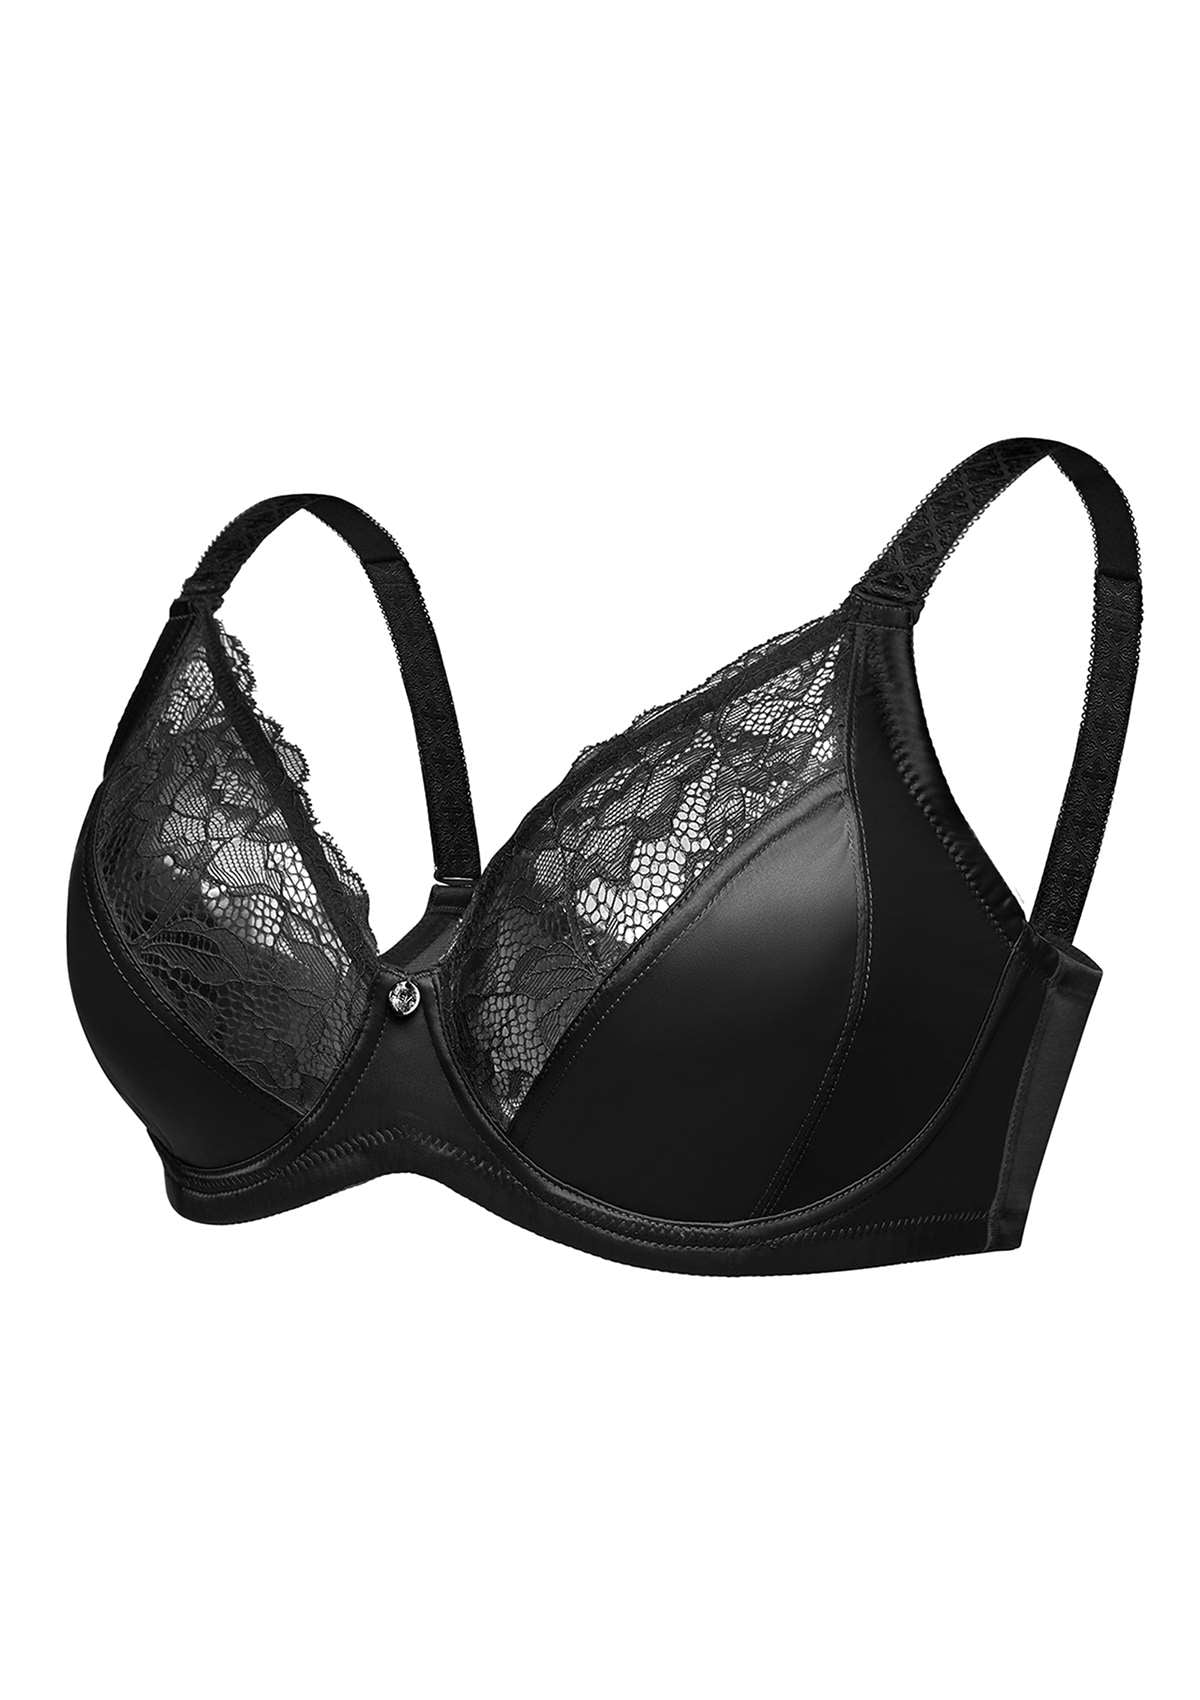 HSIA Foxy Satin Silky Full Coverage Underwire Bra With Floral Lace Trim - Black / 36 / C